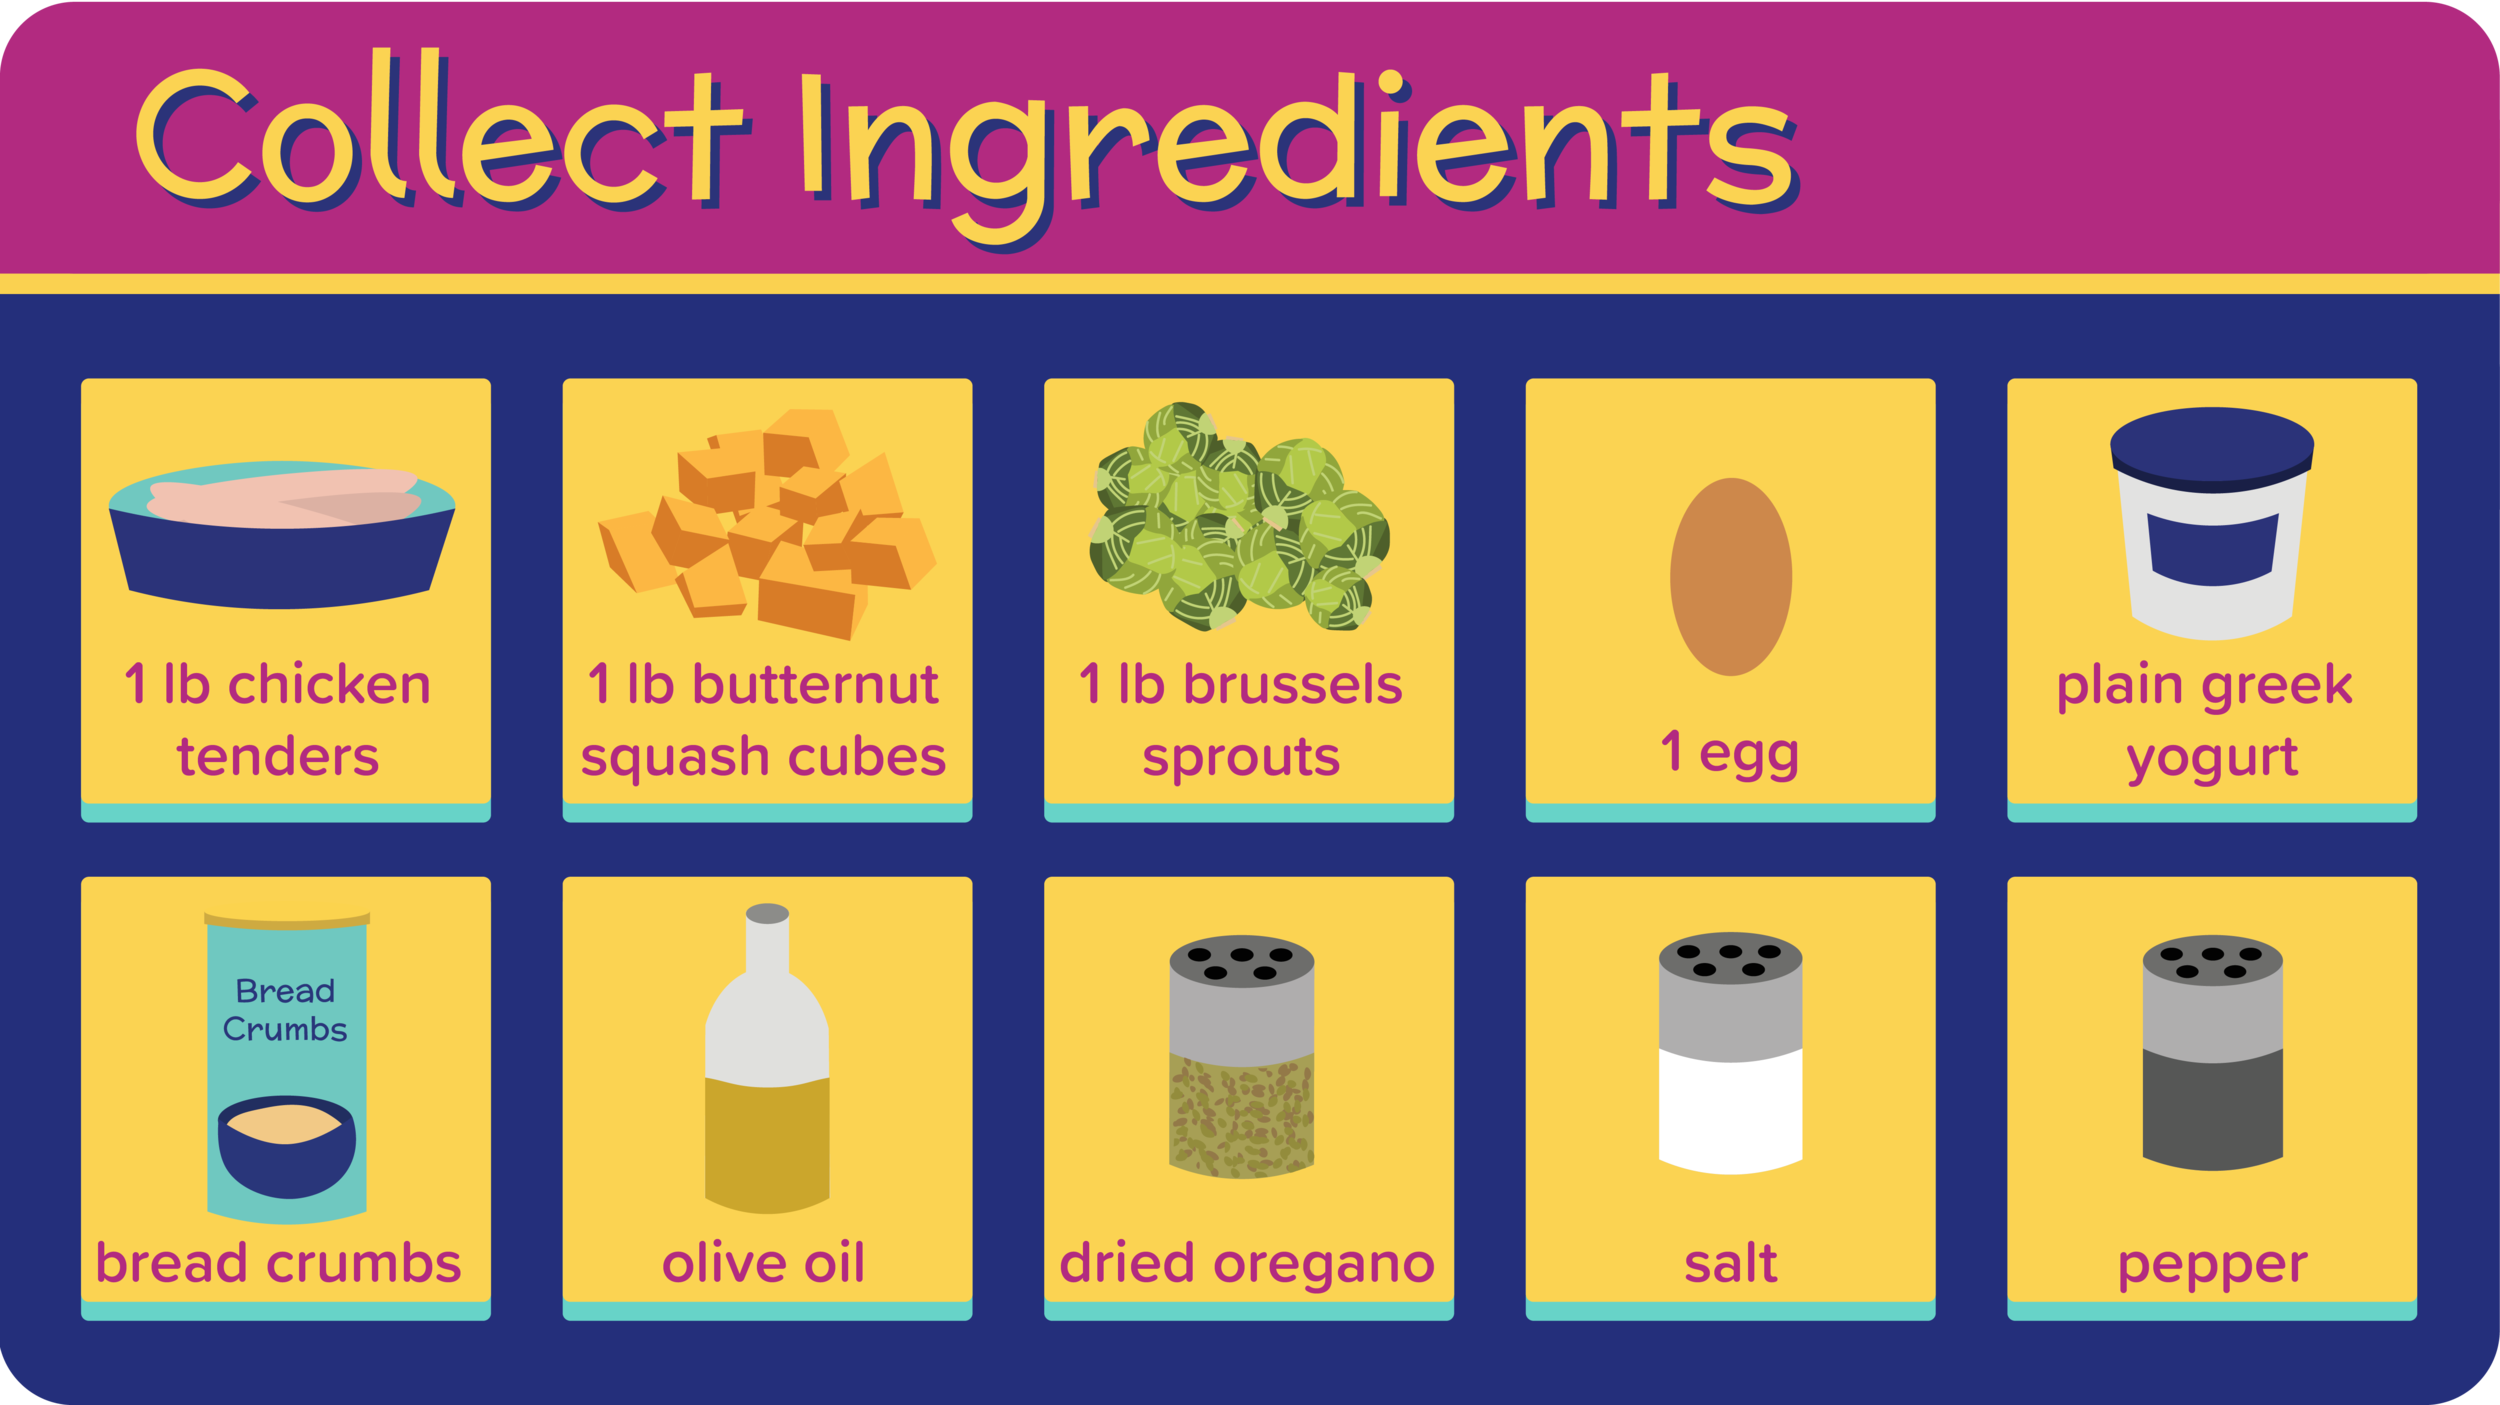 04_ChickenFingersButternutBrussels_Collect Ingredients-01.png